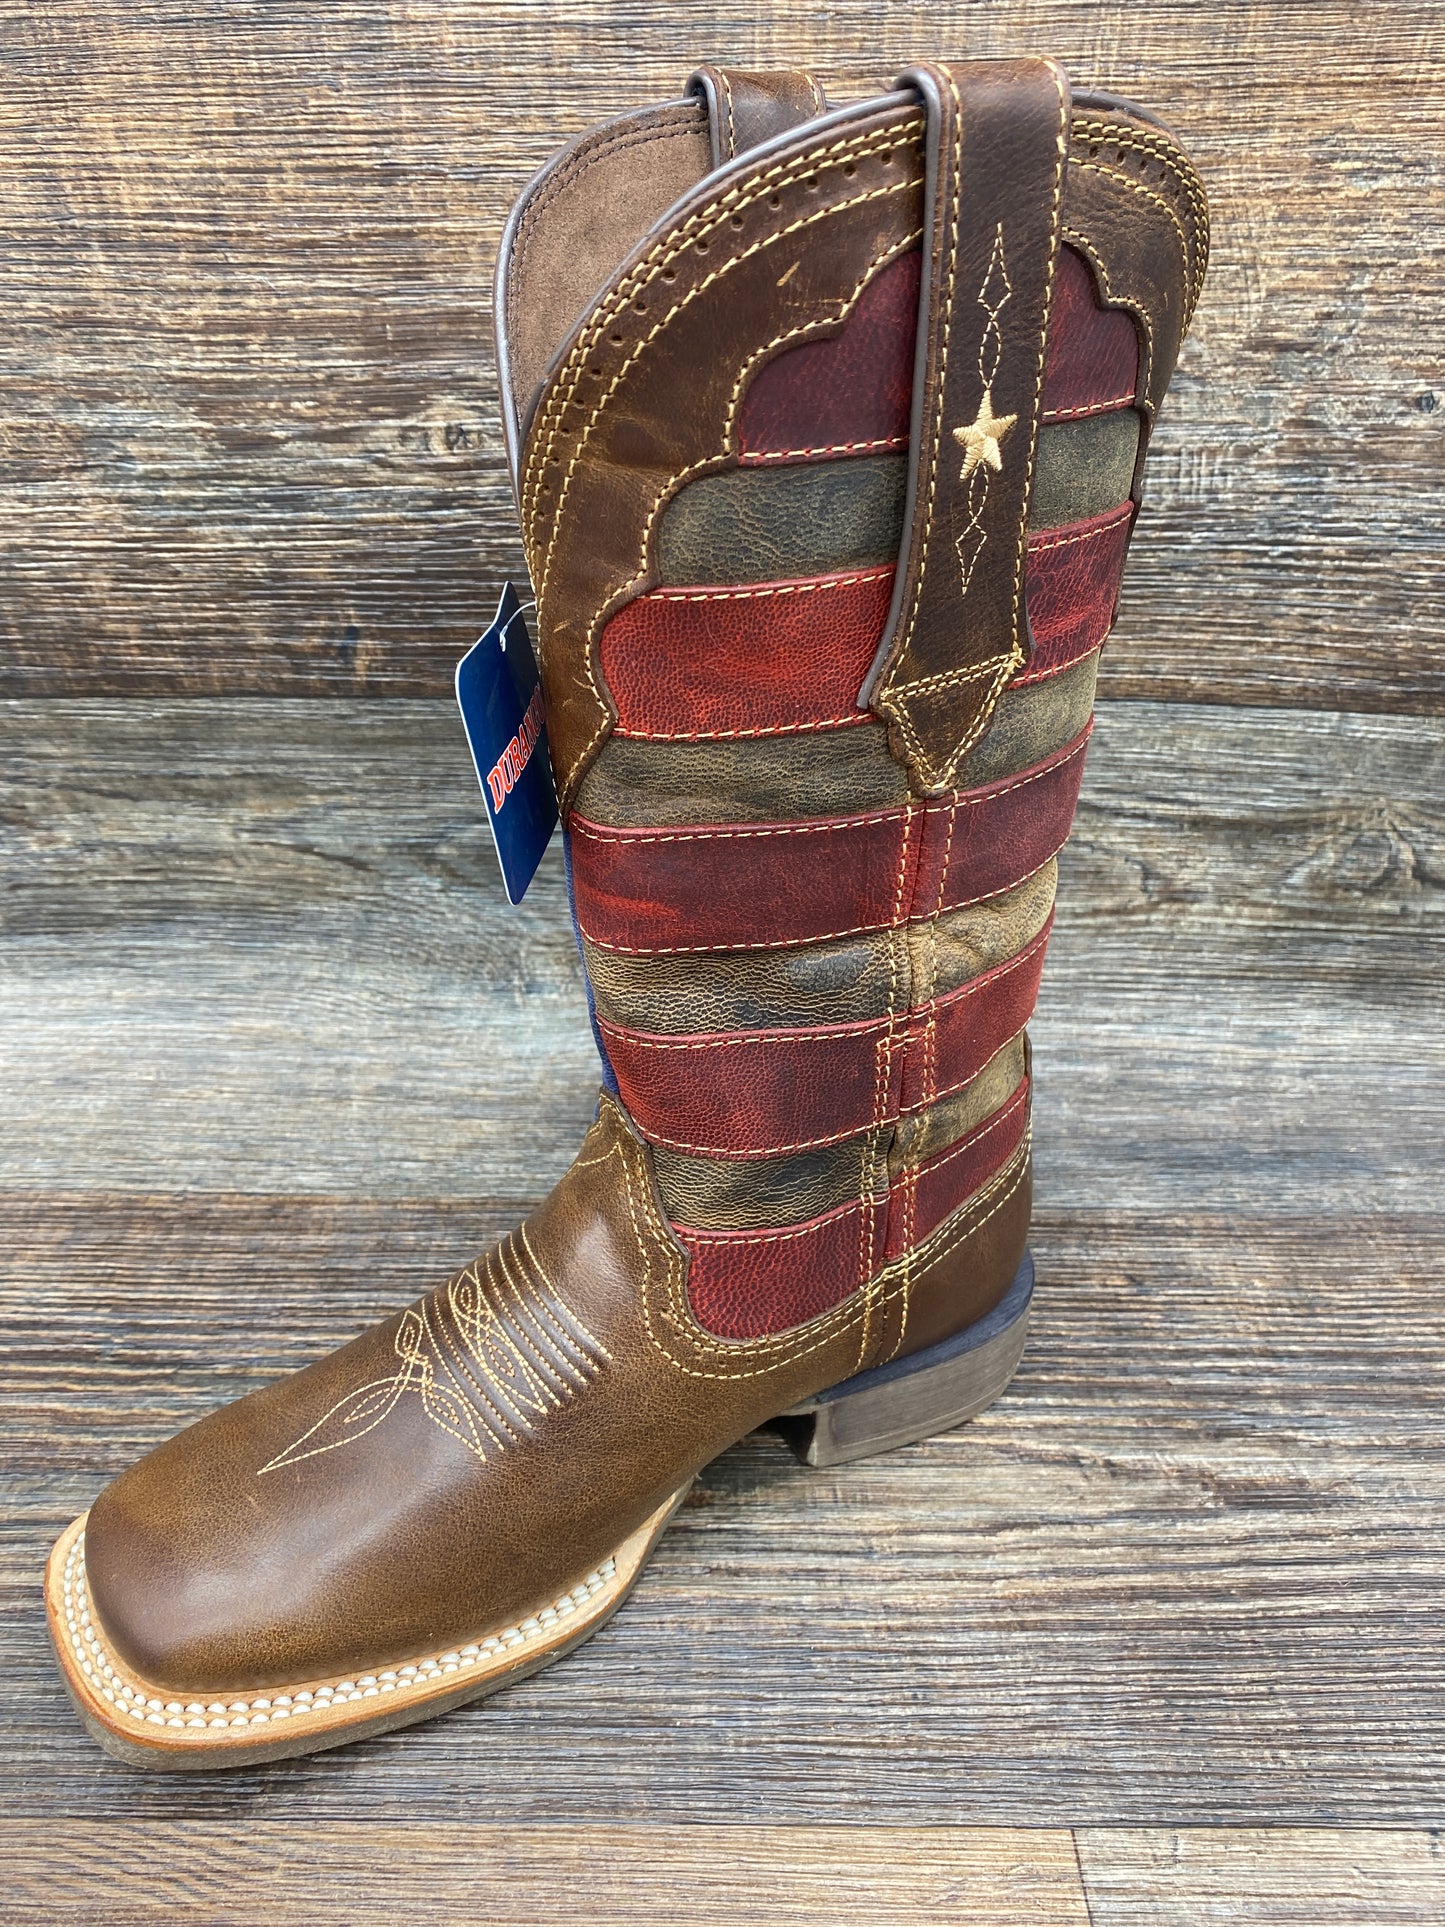 drd0393 Lady Rebel Pro Vintage Flag boot by Durango